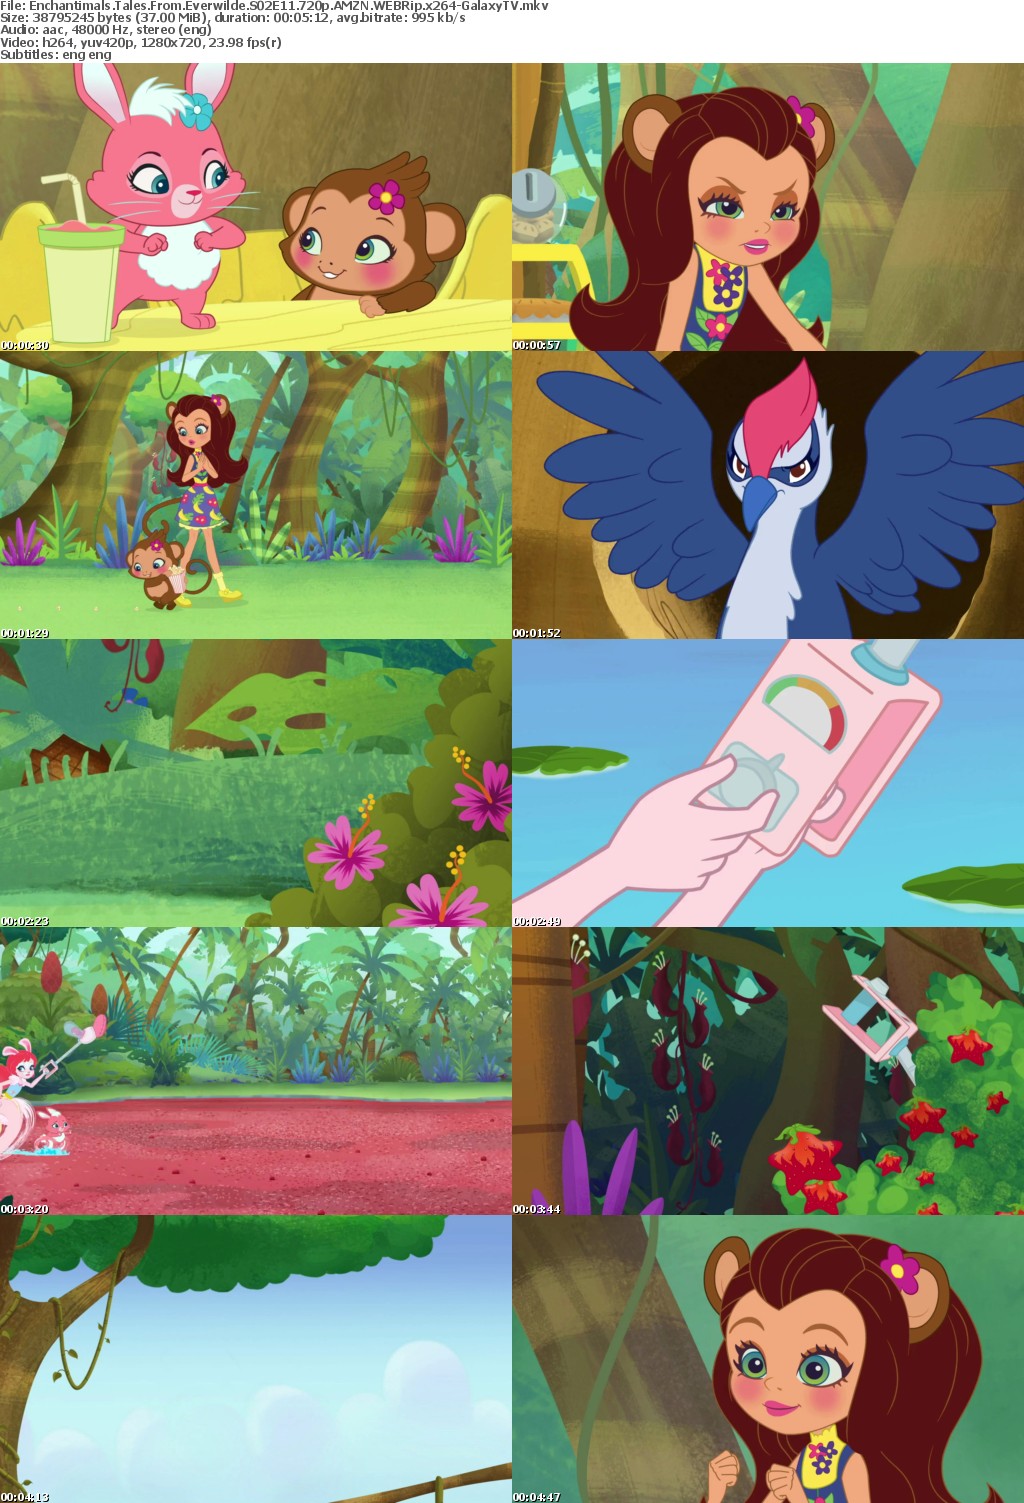 Enchantimals Tales From Everwilde S02 COMPLETE 720p AMZN WEBRip x264-GalaxyTV